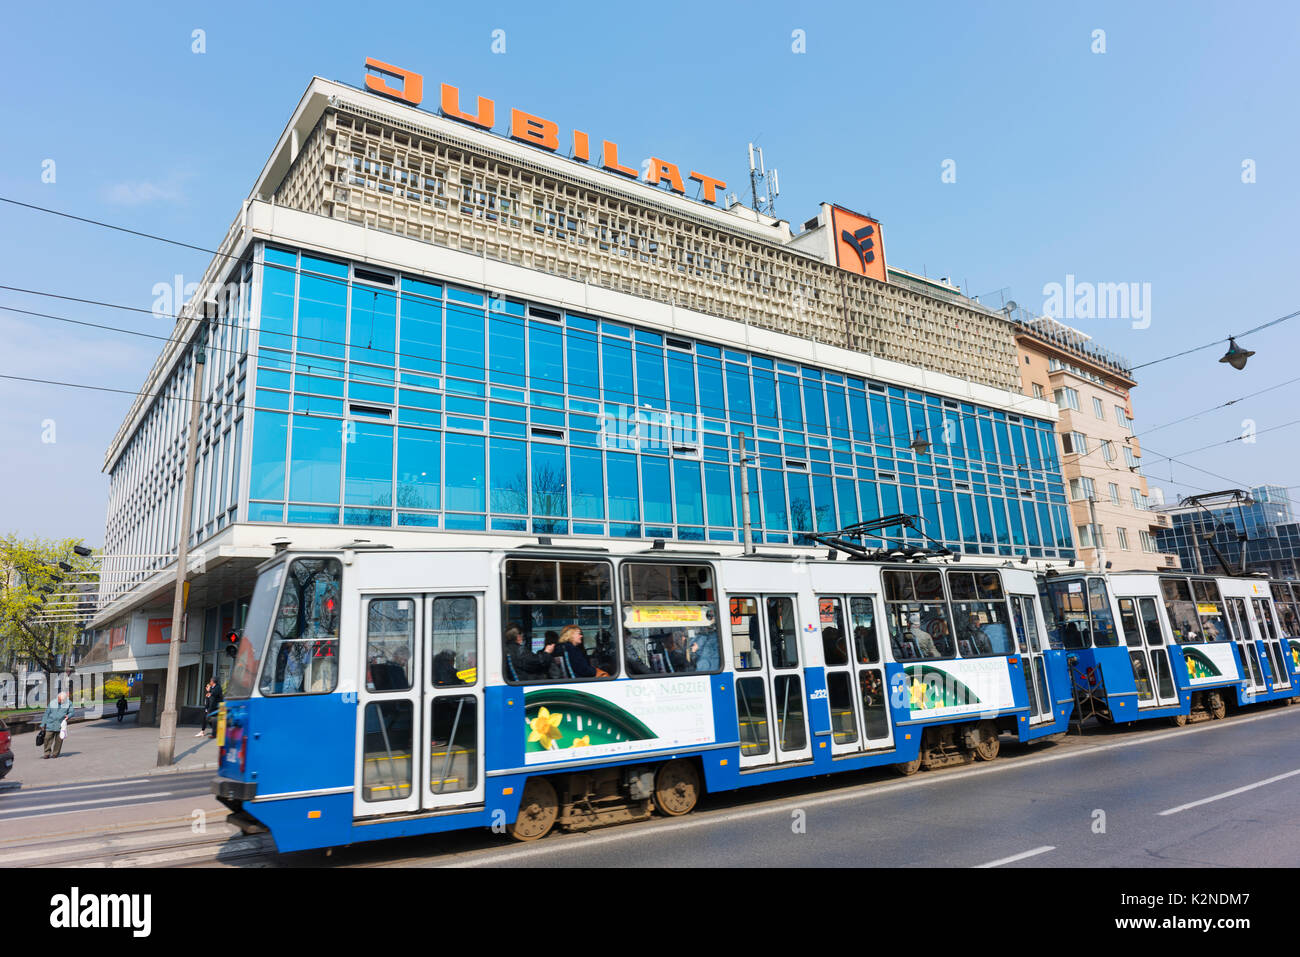 A tram passes by Jubilat, a Soviet-era department store in central Krakow. Stock Photo